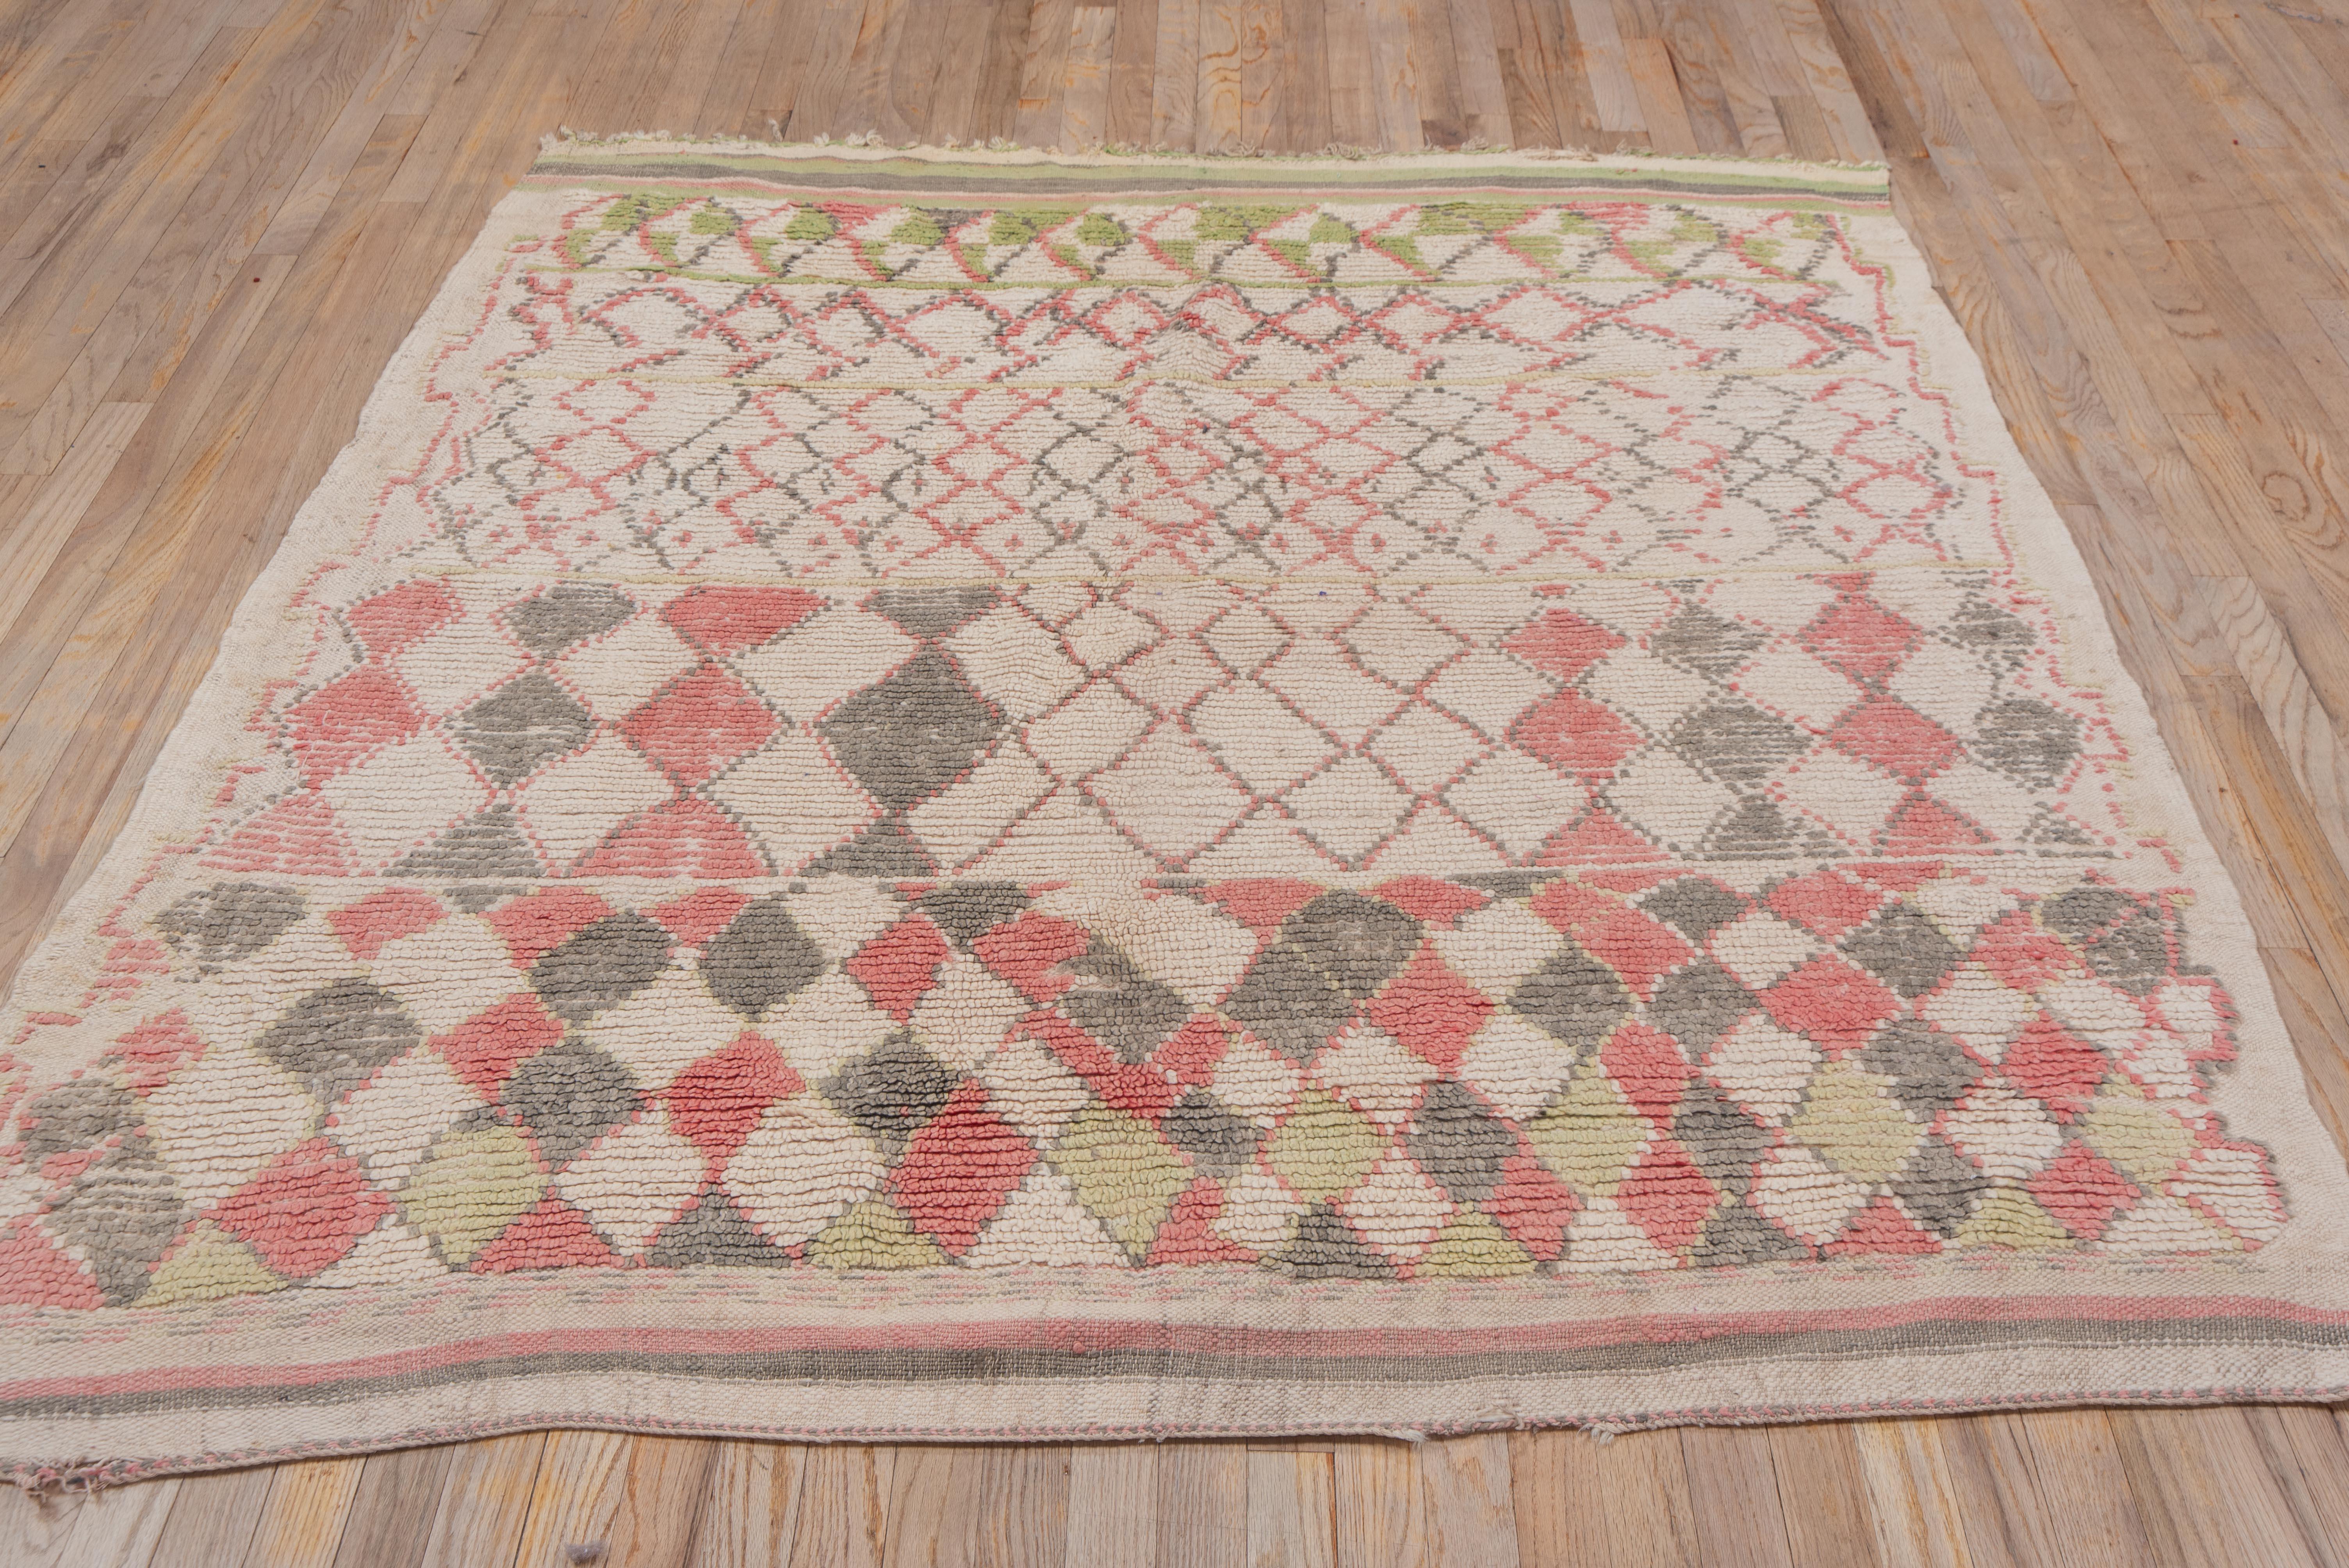 Wool Allover Moroccan Village Rug in Pear Green Clay Red and Faded Black For Sale